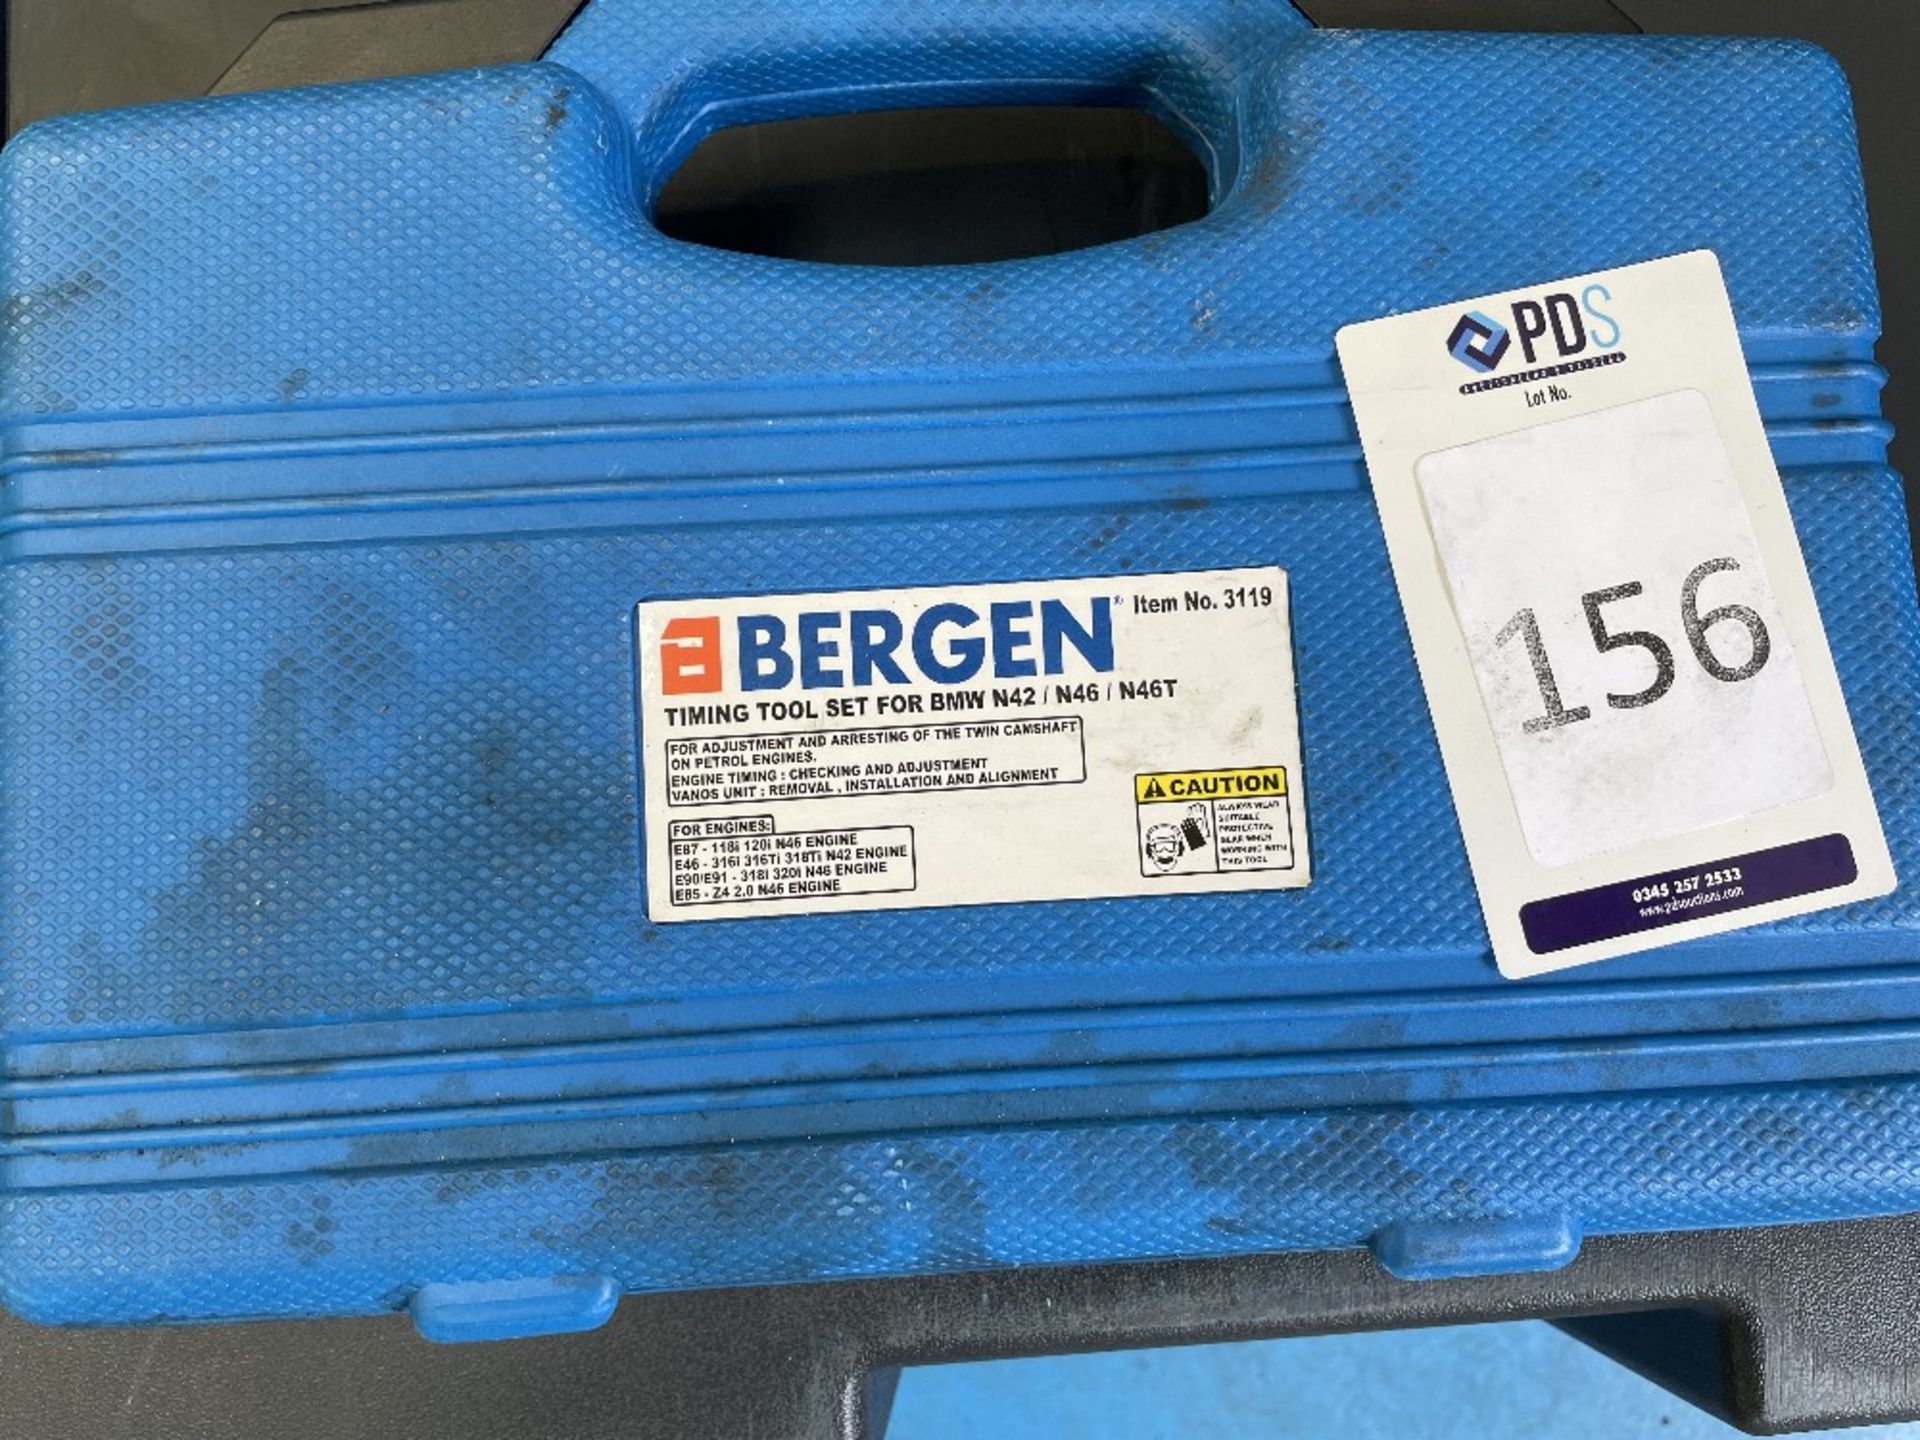 Bergen BMW Timing Tool Set for N46, N42, N46T (Location Surbiton . Please Refer to General Notes)